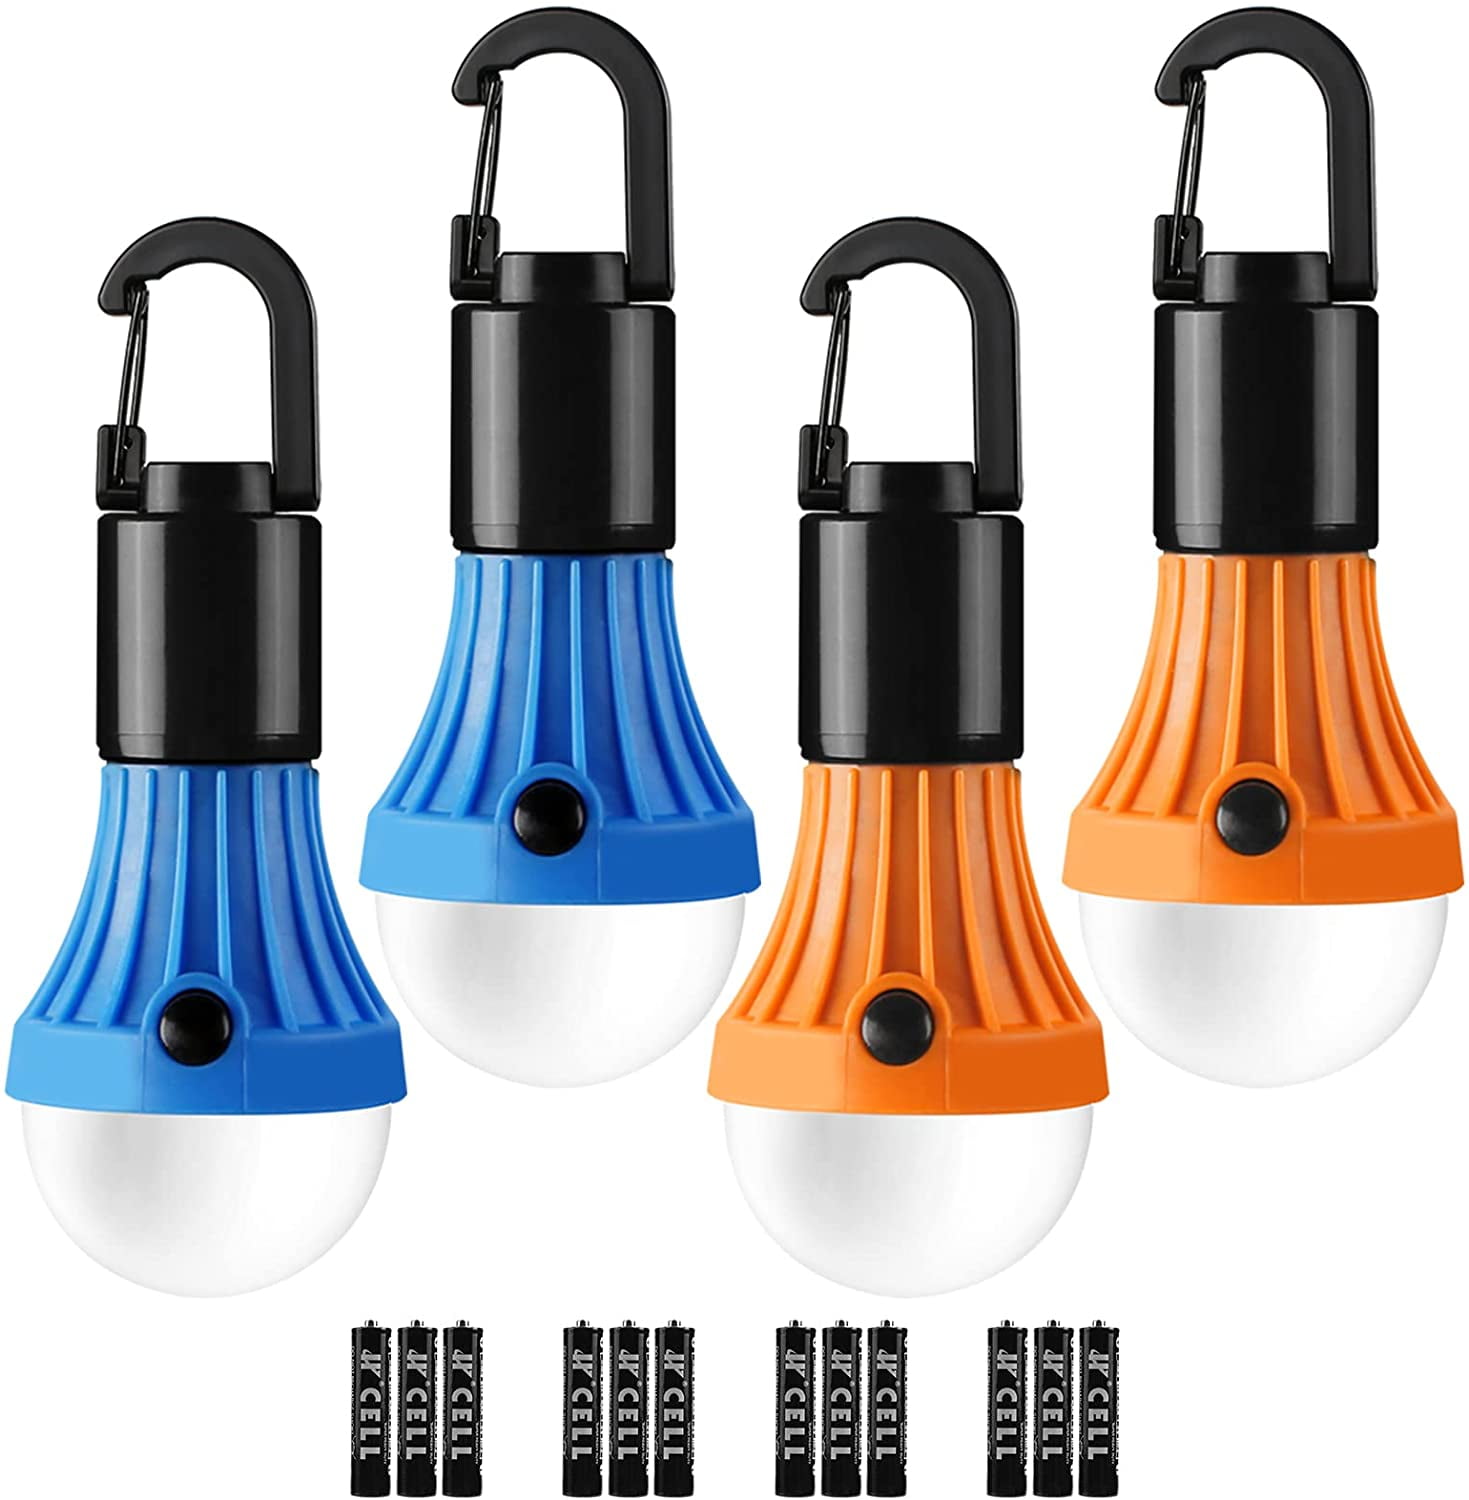 Lichamp 4 Pack LED Camping Lanterns, Battery Powered Camping